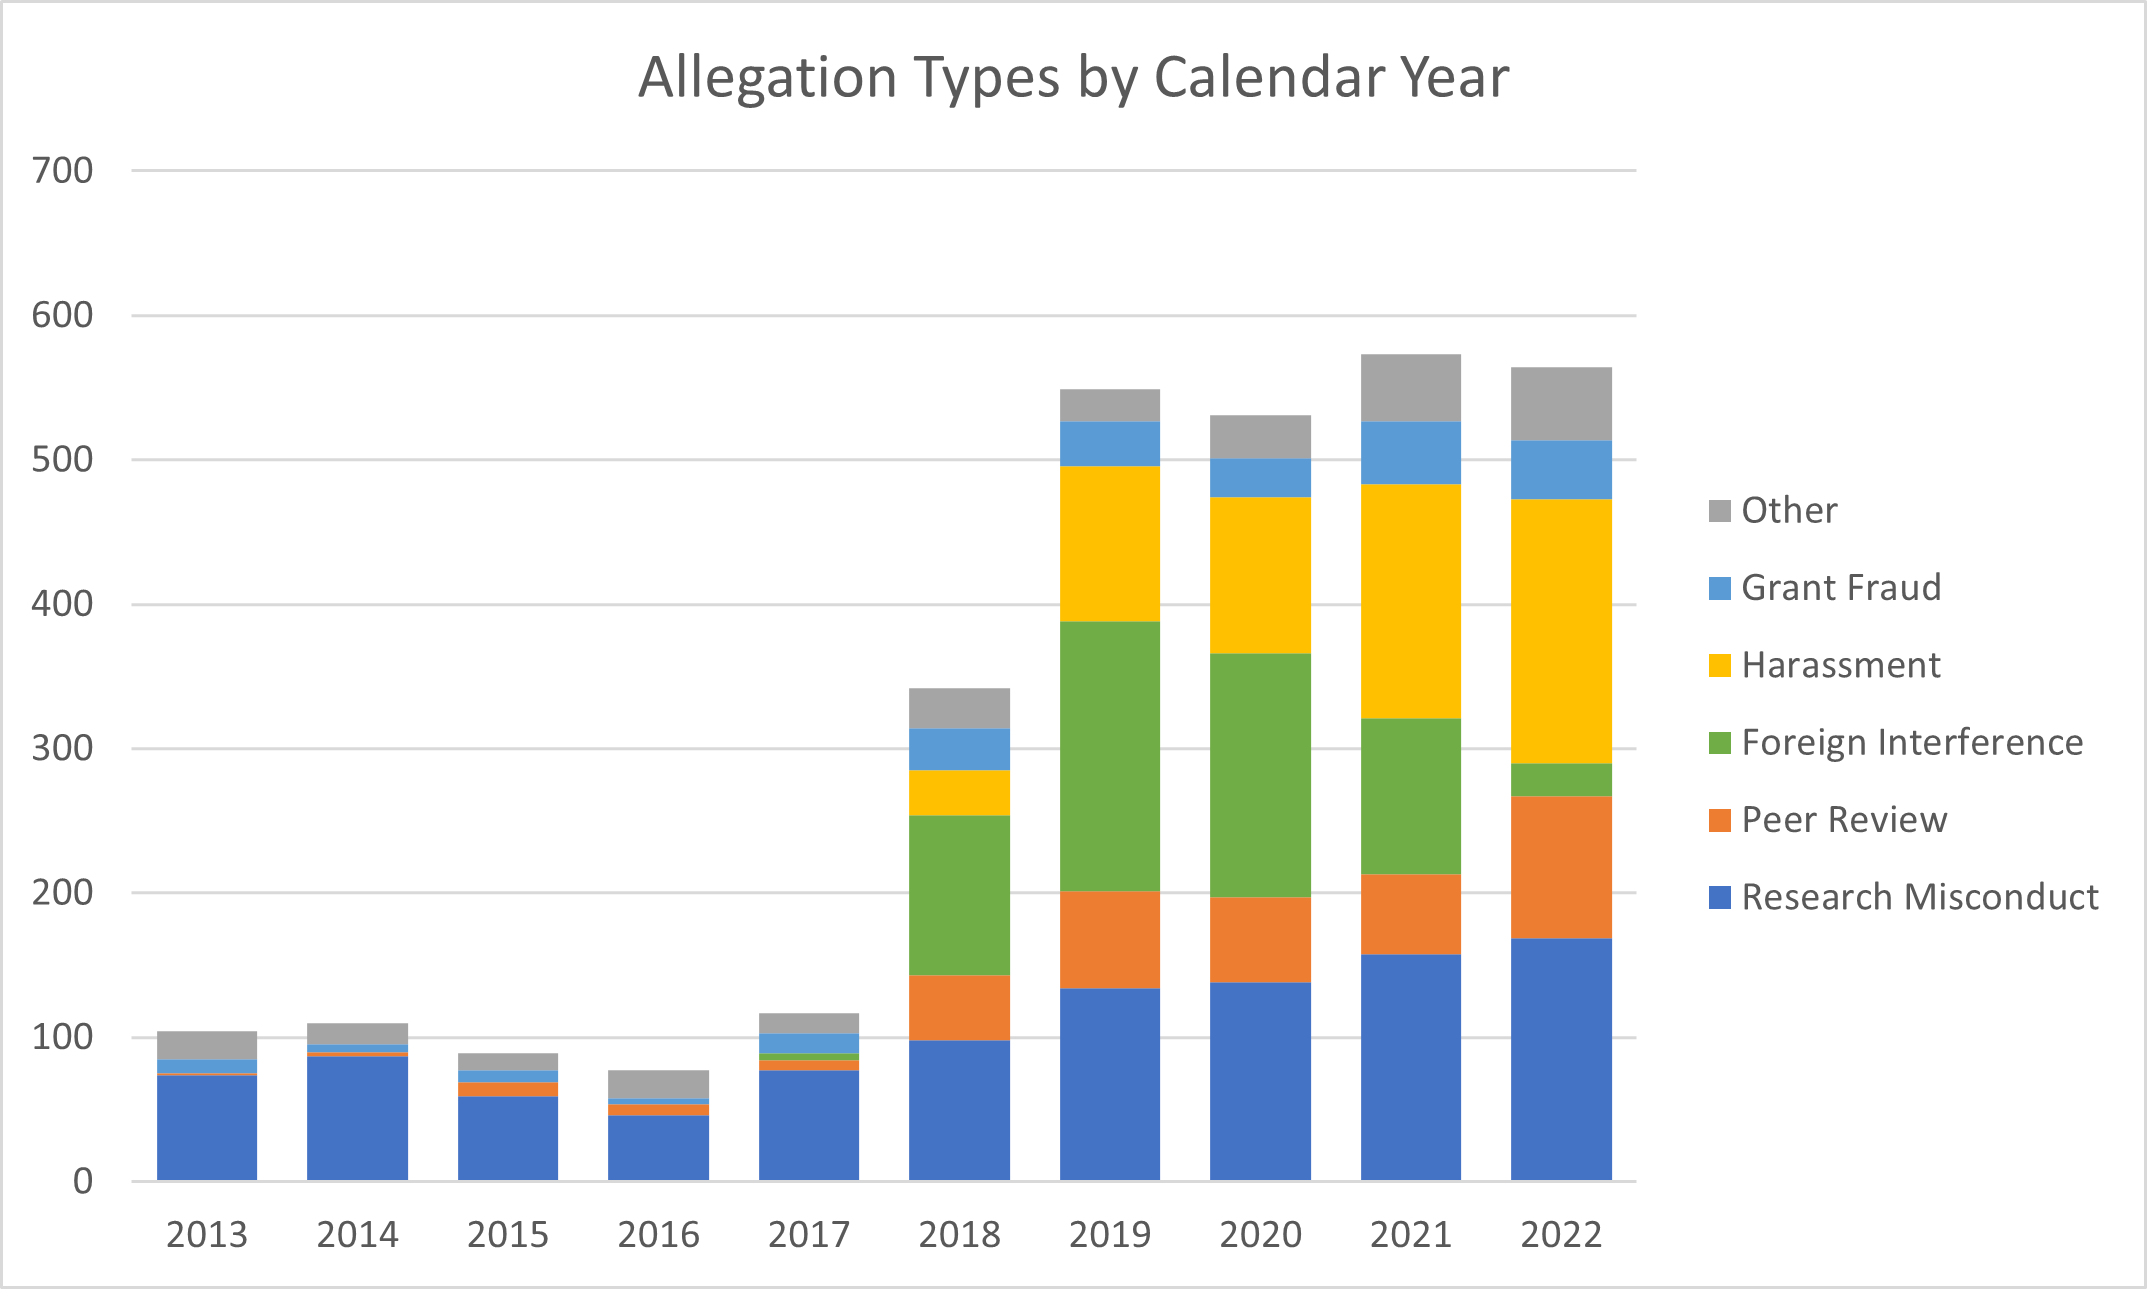 Figure 1 is a stacked bar graph showing research integrity allegations by year. The X axis represents calendar year from 2013 to 2022, while the Y axis represents the number of allegations from 0 to 700. Research misconduct allegations are in the dark blue bars, peer review in dark orange, foreign interference in green, harassment in light orange, grant fraud in light blue, and other in gray. 